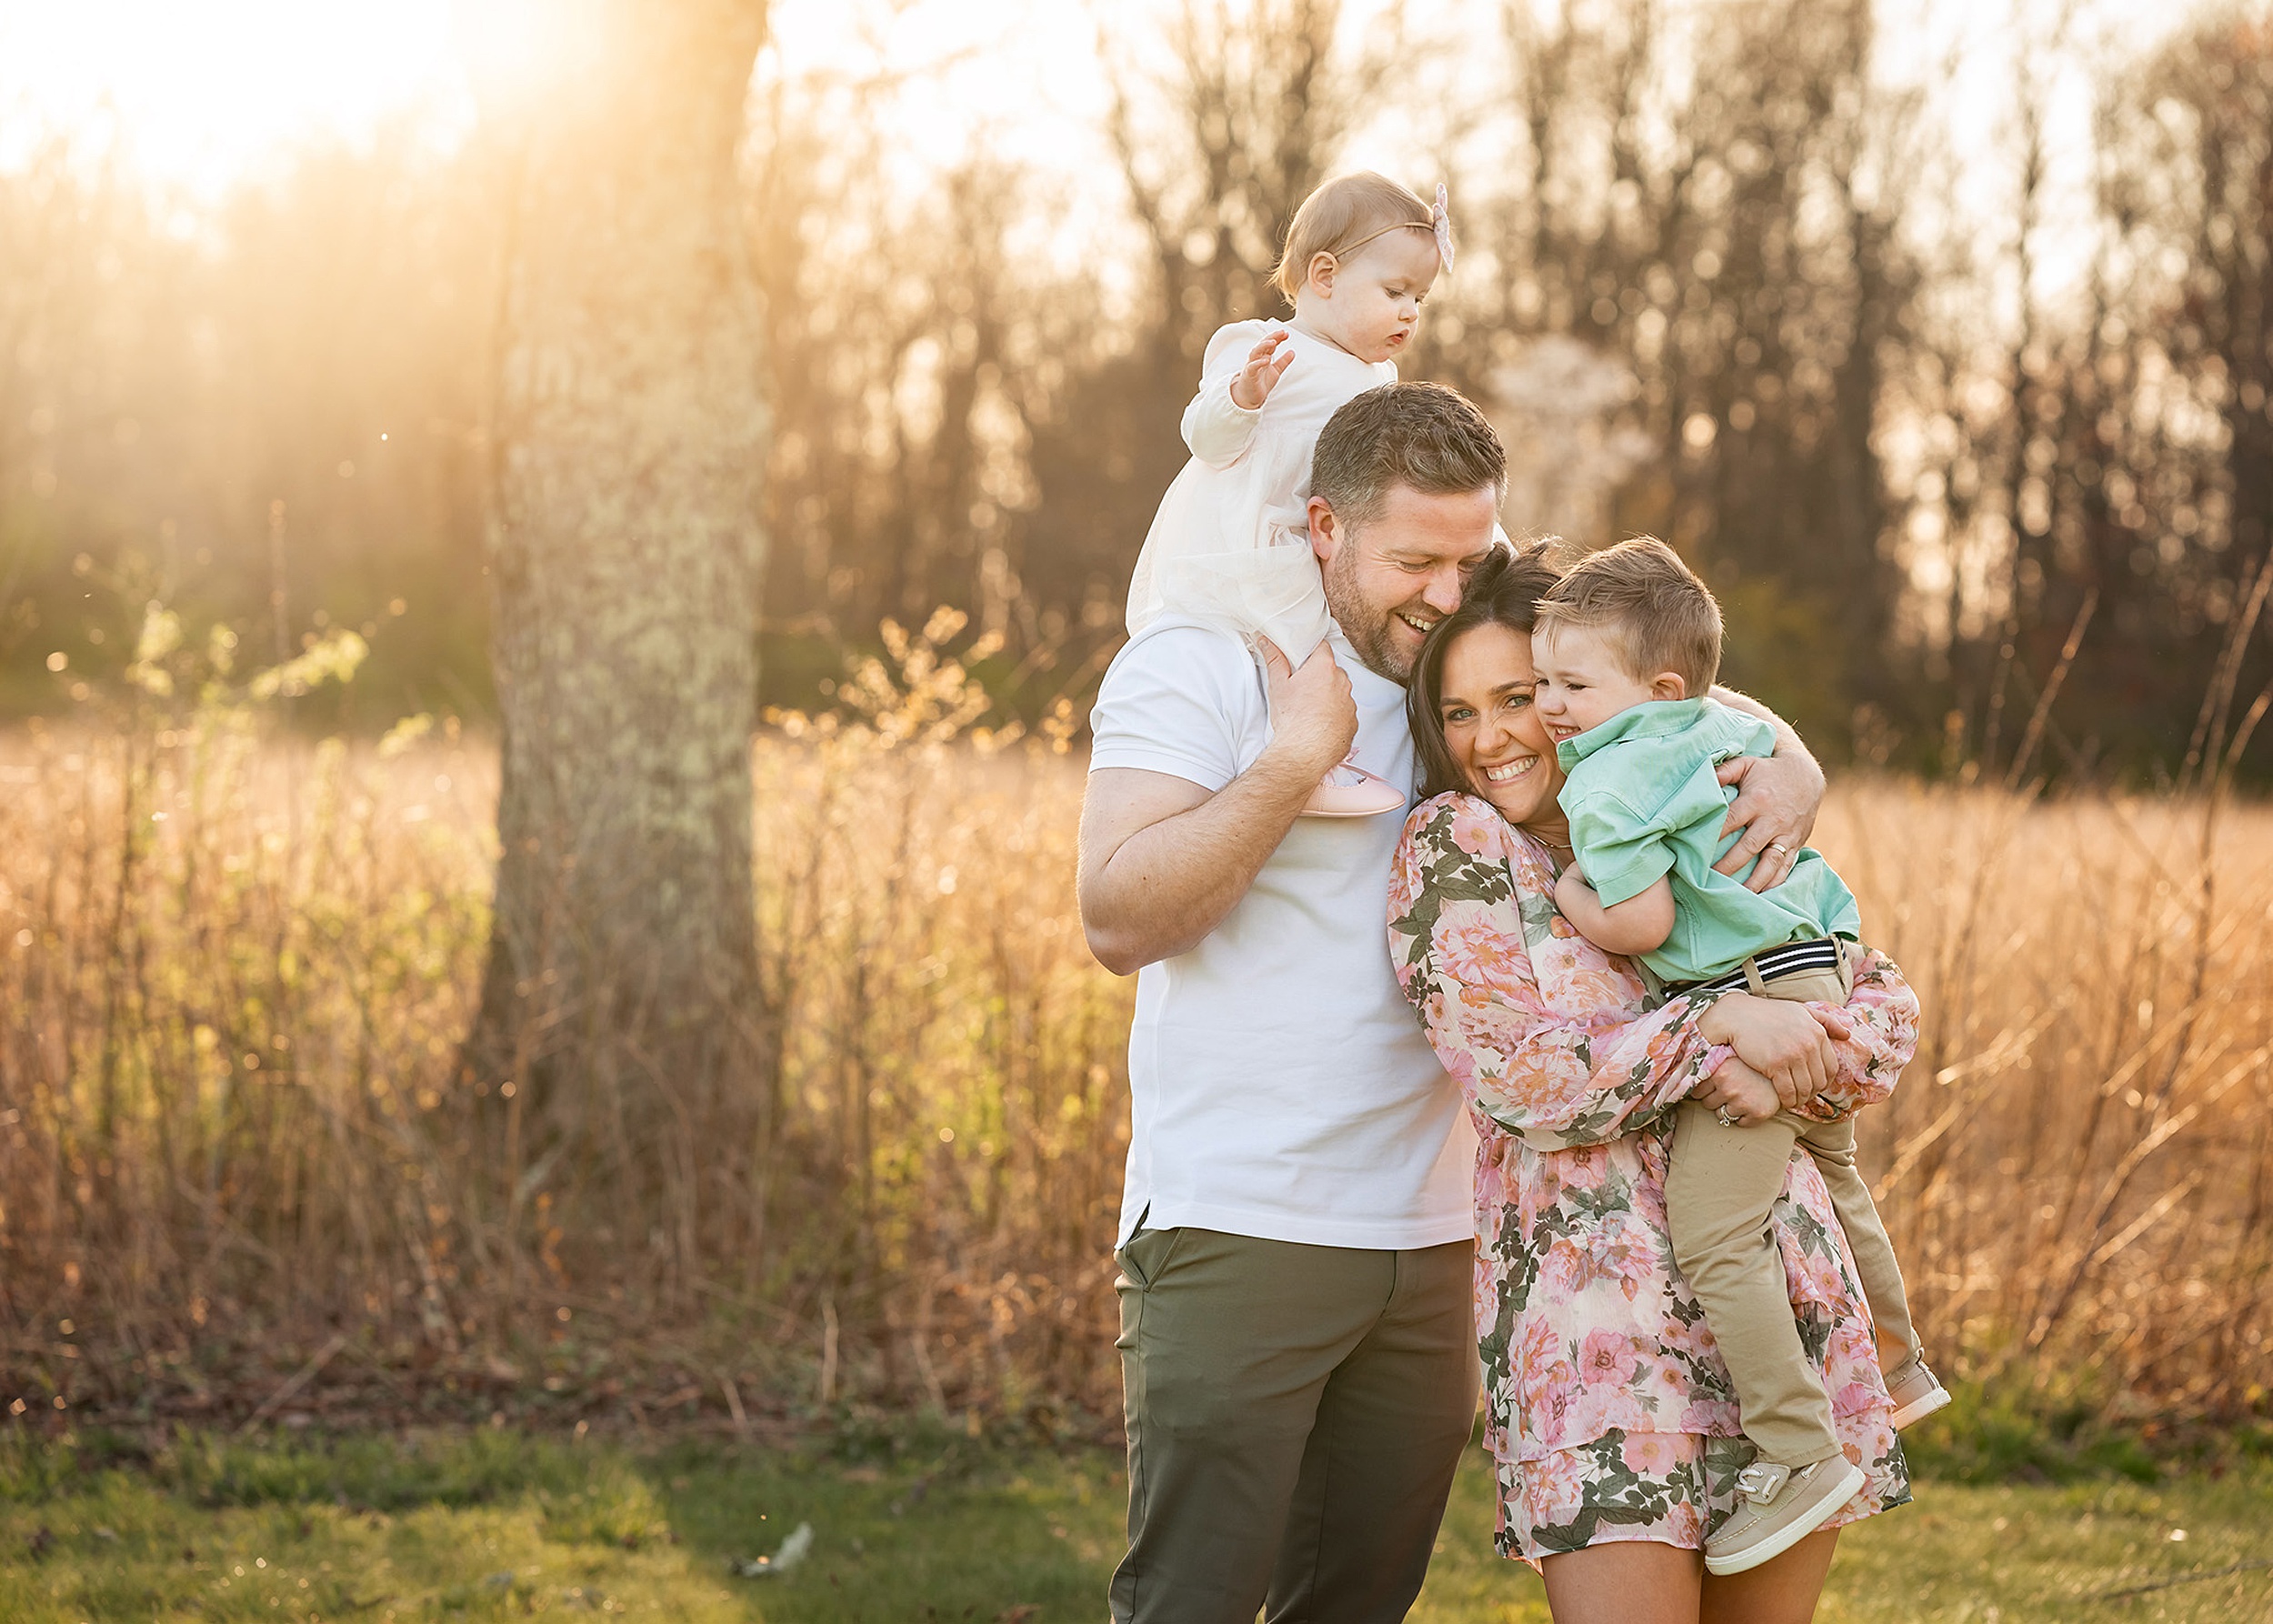 Happy mom and dad stand and laugh together while holding their toddler son and daughter in a park at sunset after visiting daycares in morris county nj